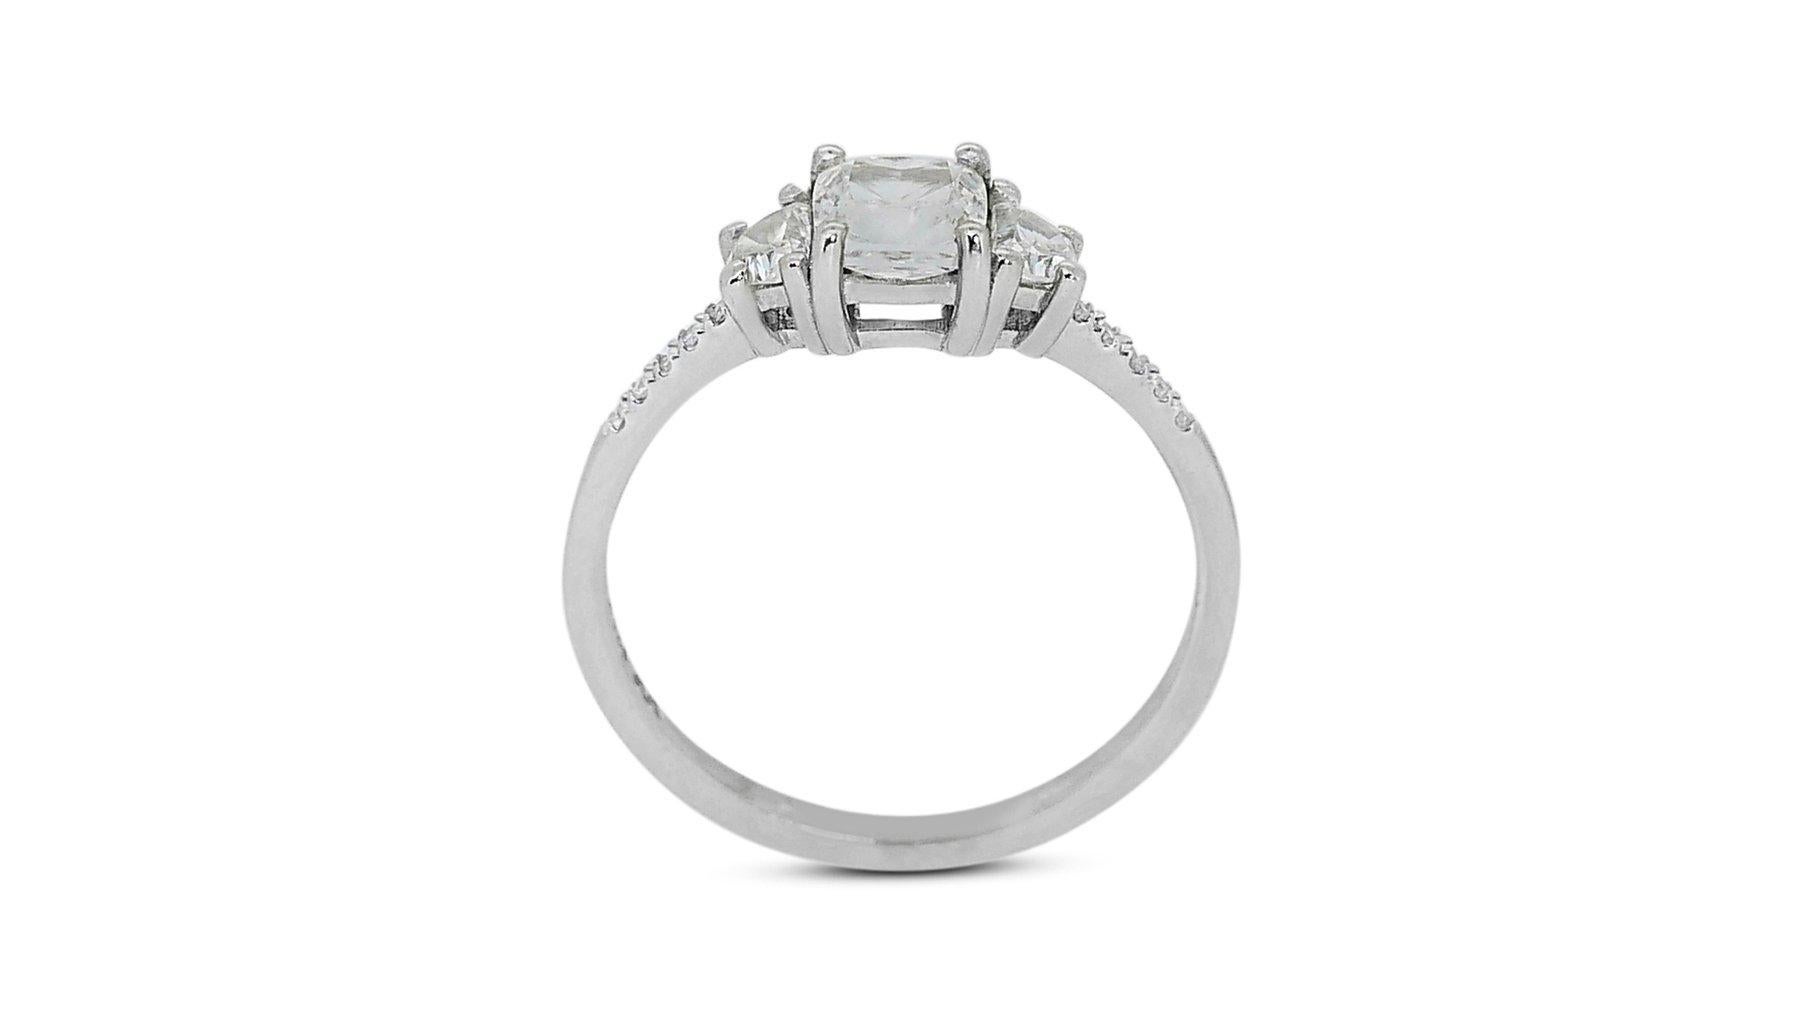 Captivating 18K White Gold Natural Diamond Halo Ring w/1.31 Carat- GIA Certified For Sale 2